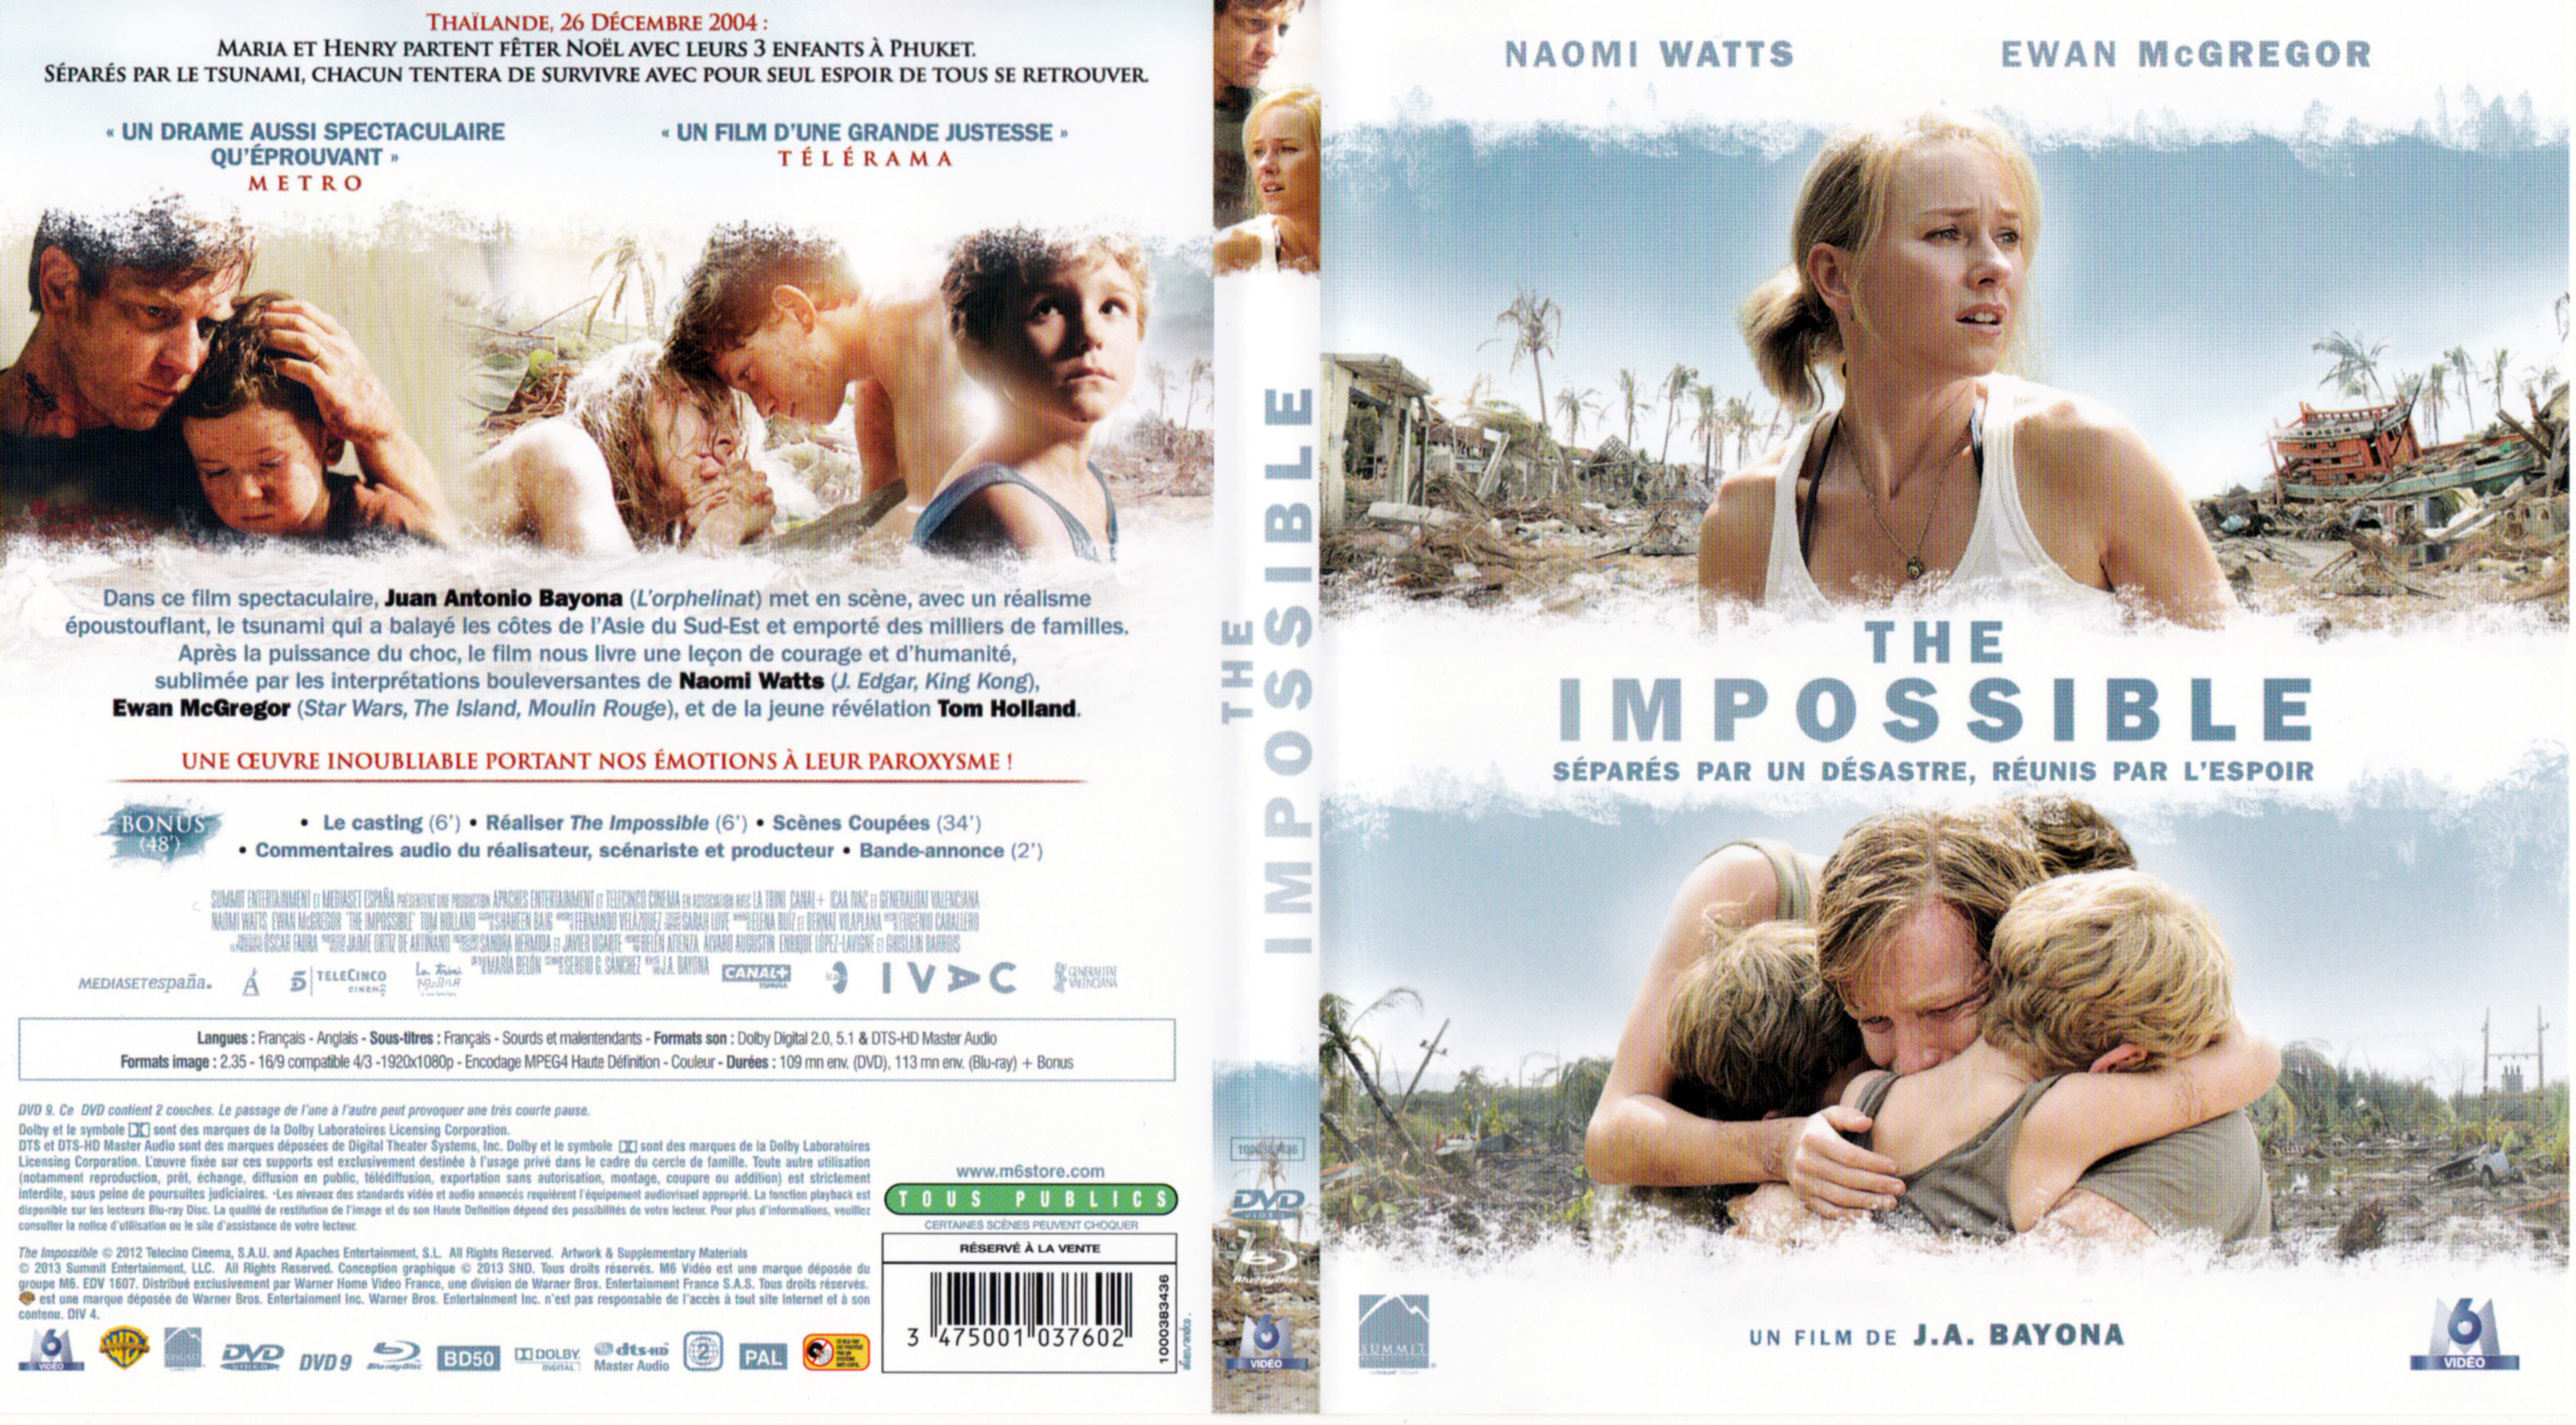 Jaquette DVD The Impossible (BLU-RAY)